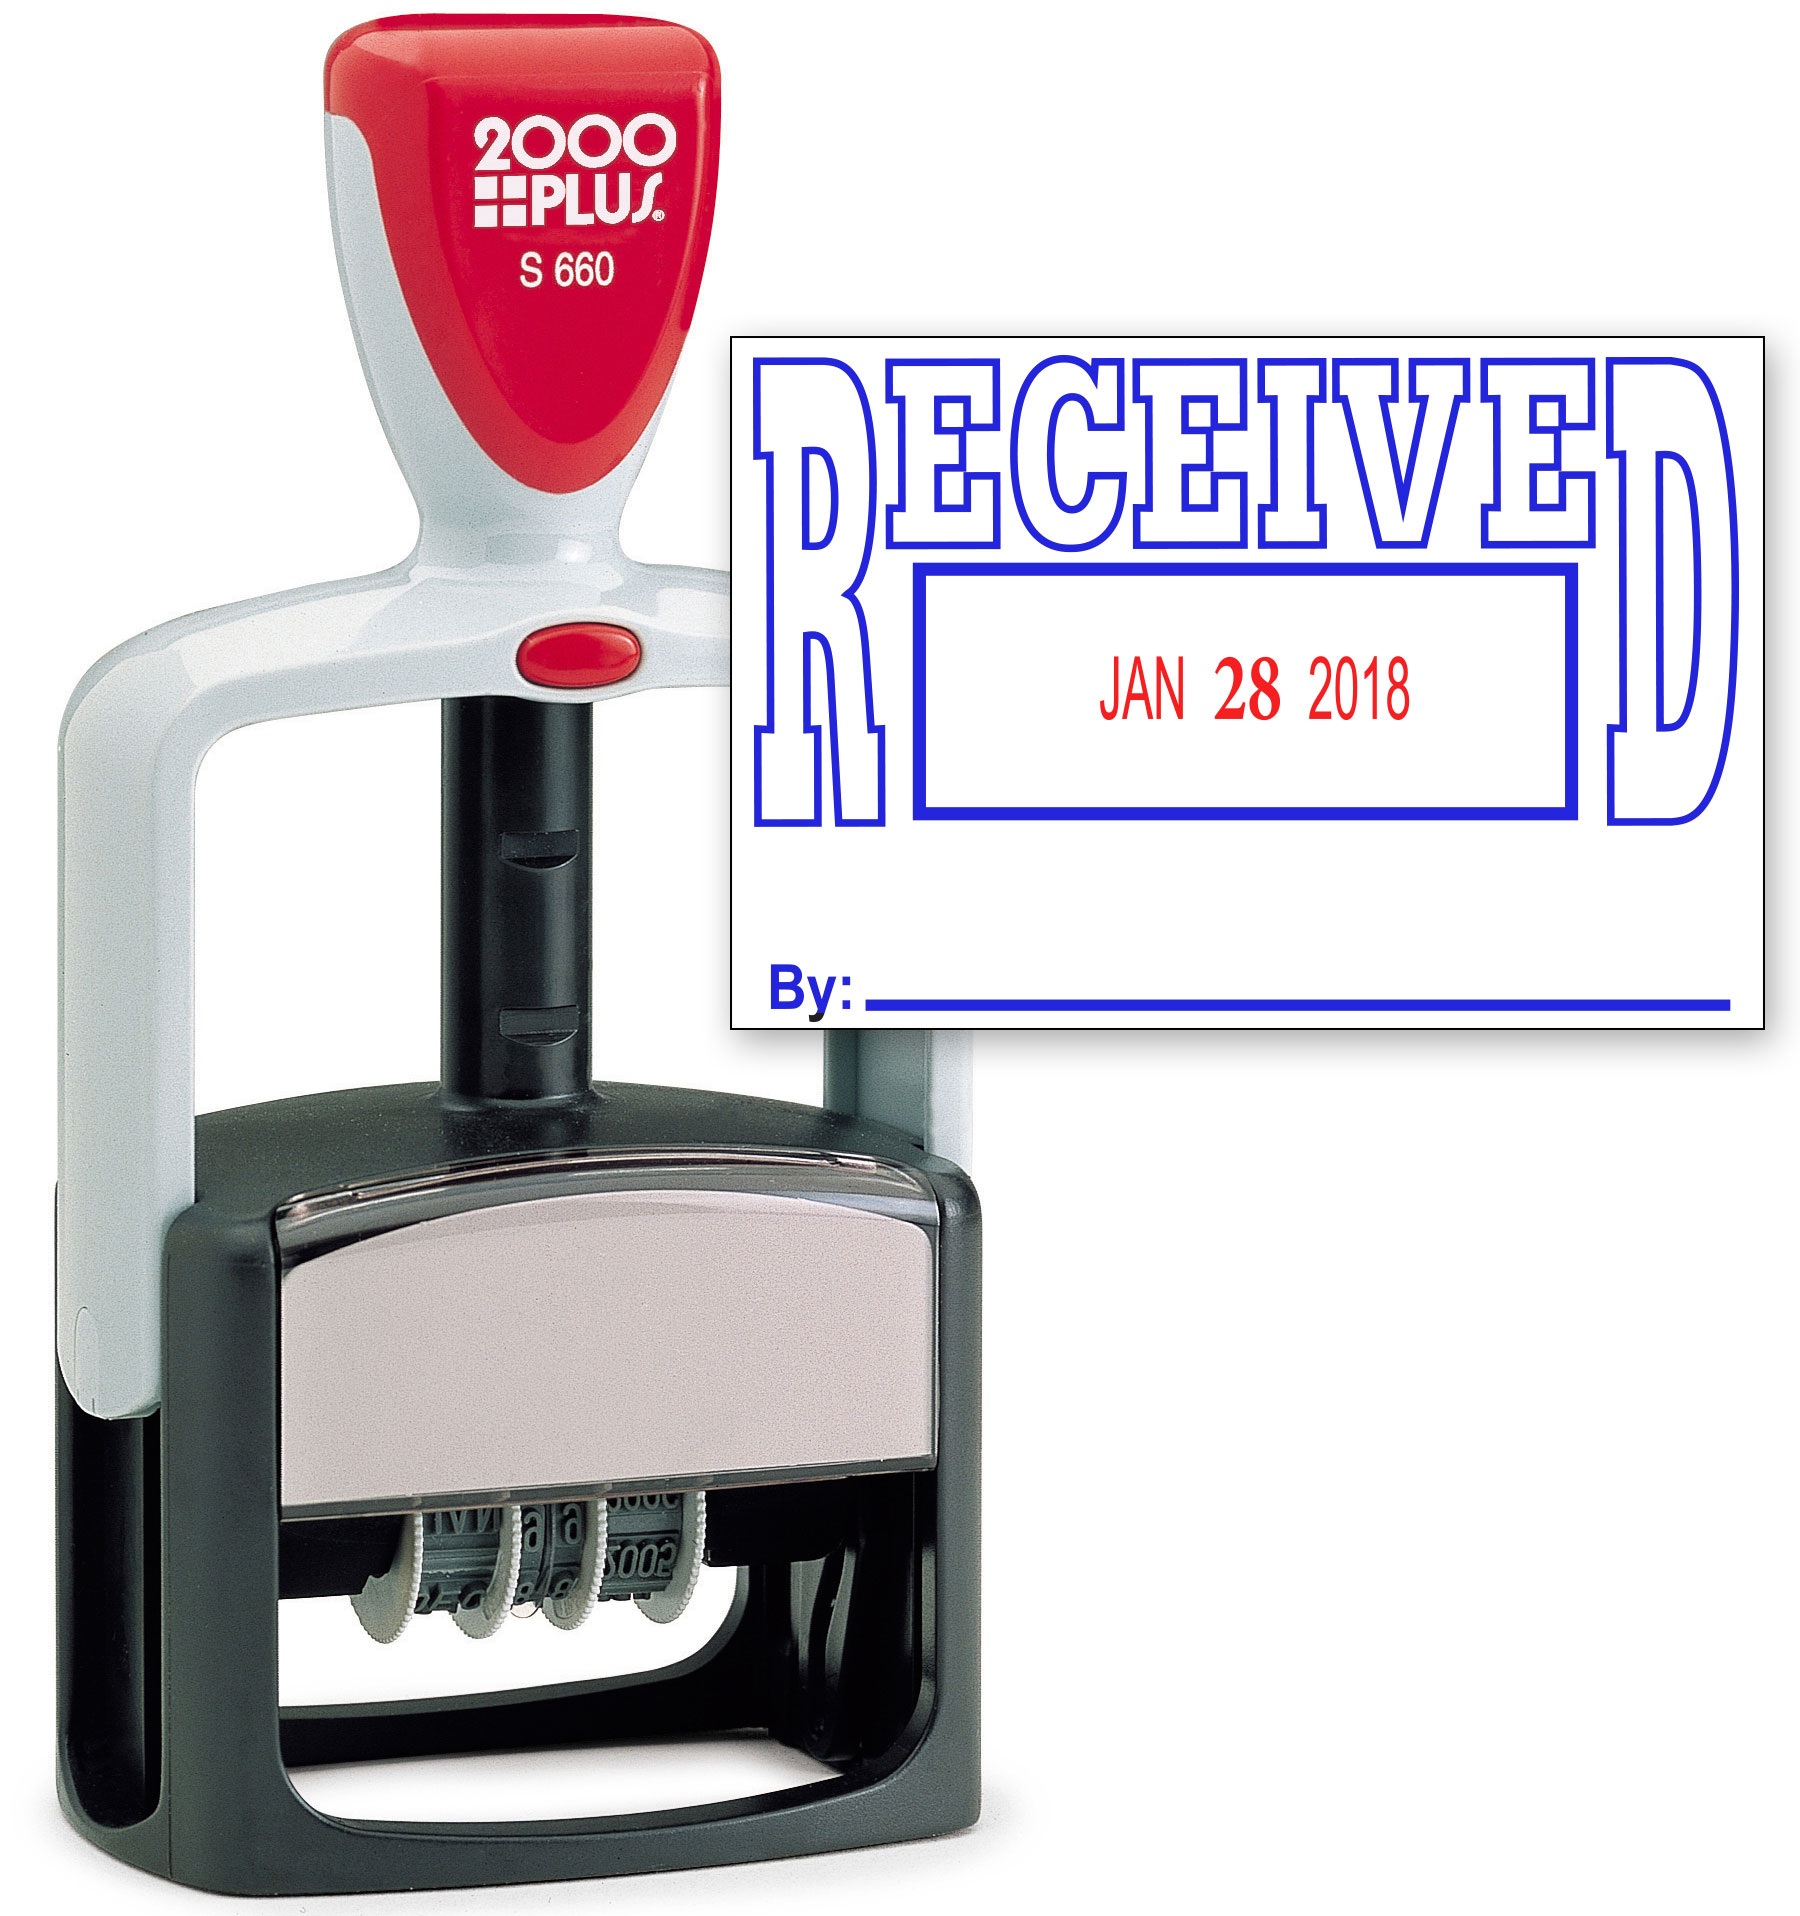 2000 PLUS Heavy Duty Style 2-Color Date Stamp with RECEIVED self inking stamp - Blue/Red Ink